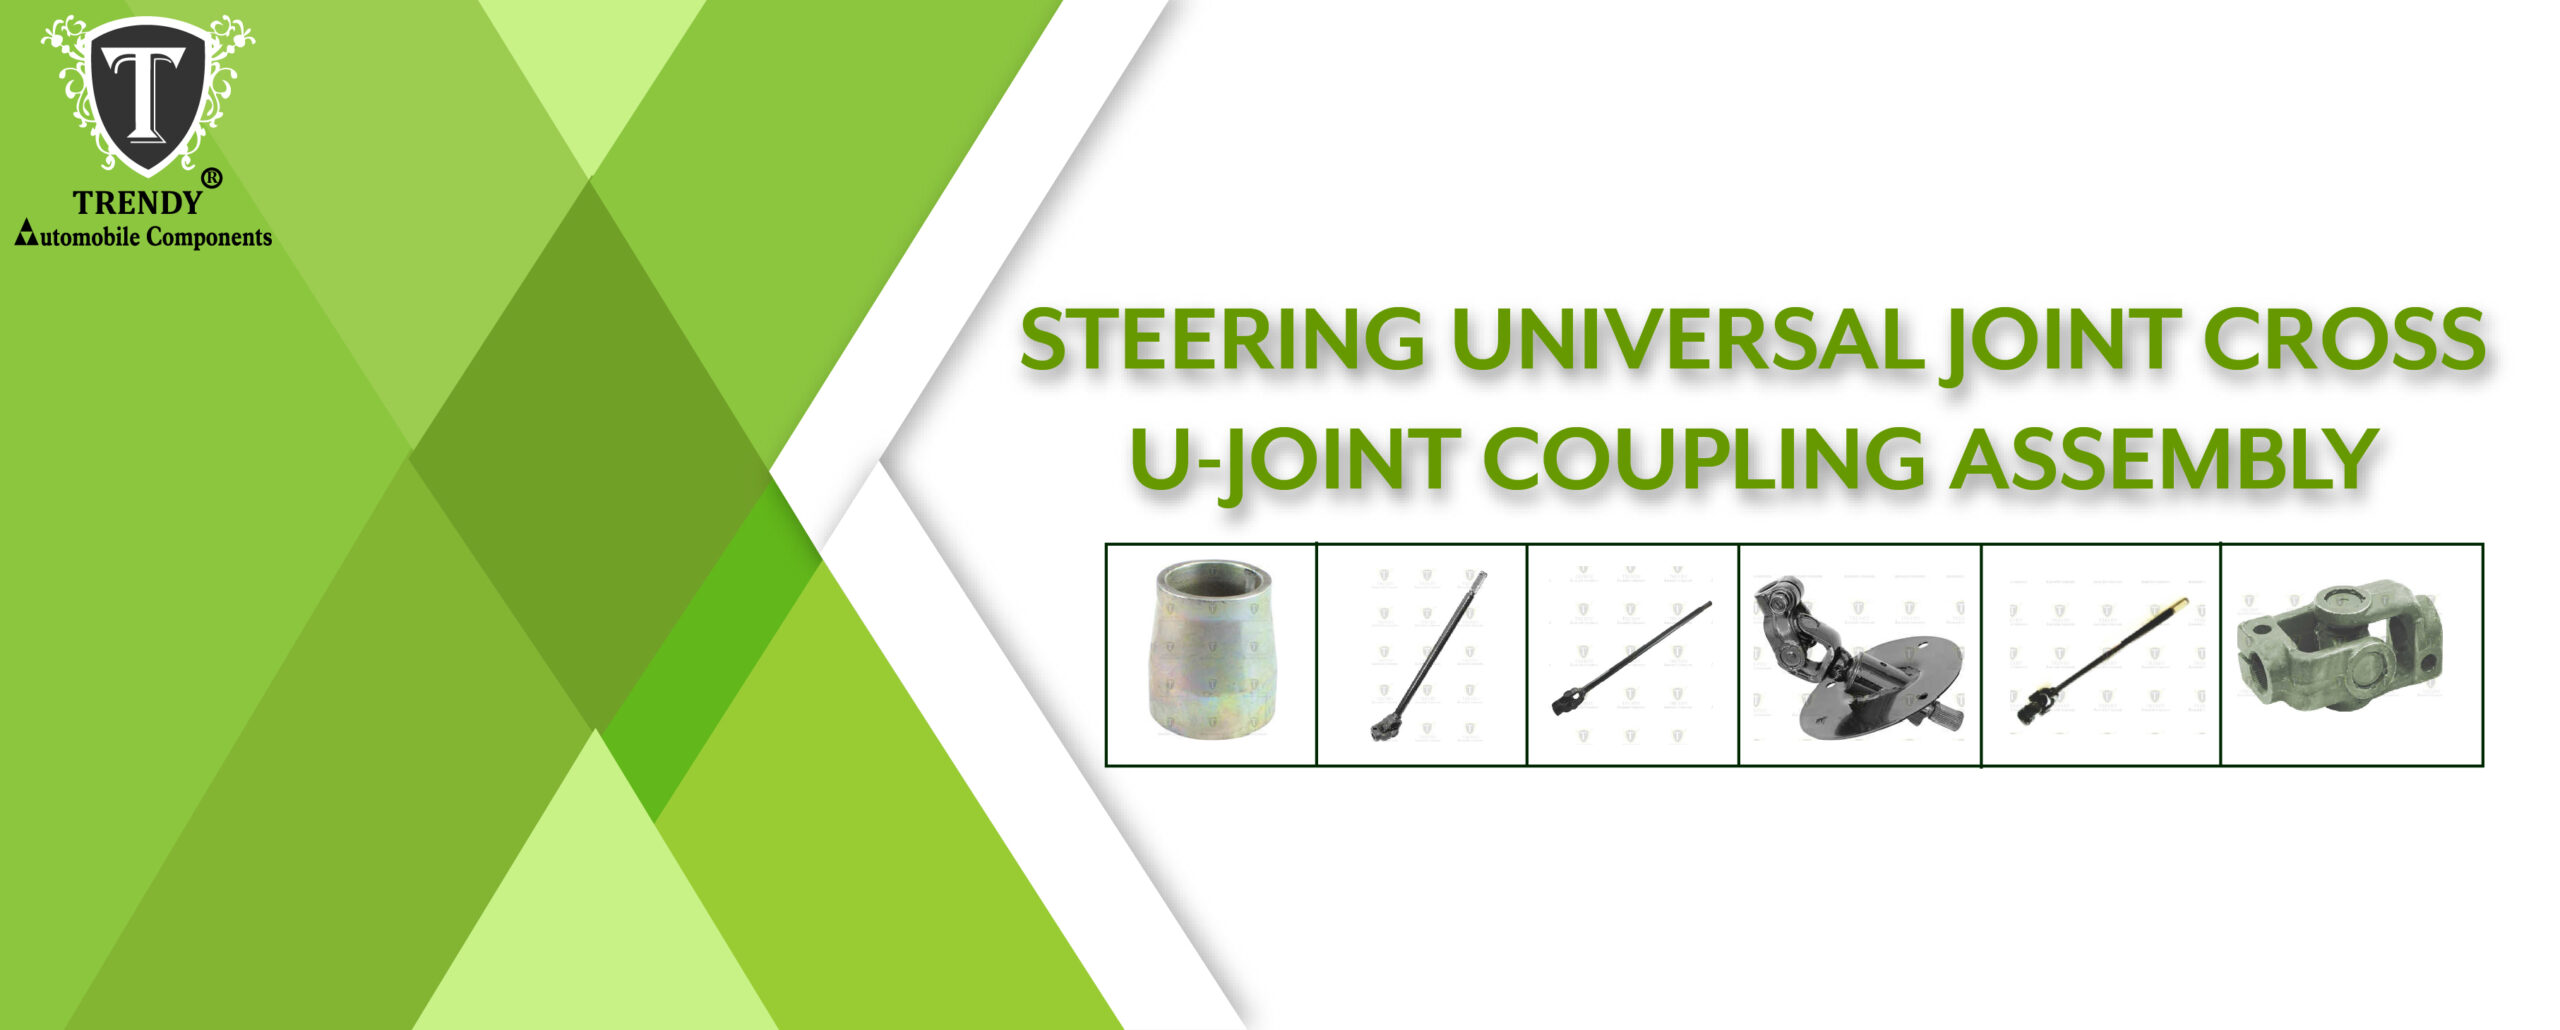 Steering Universal Joint Cross/ U-joint Coupling Assembly